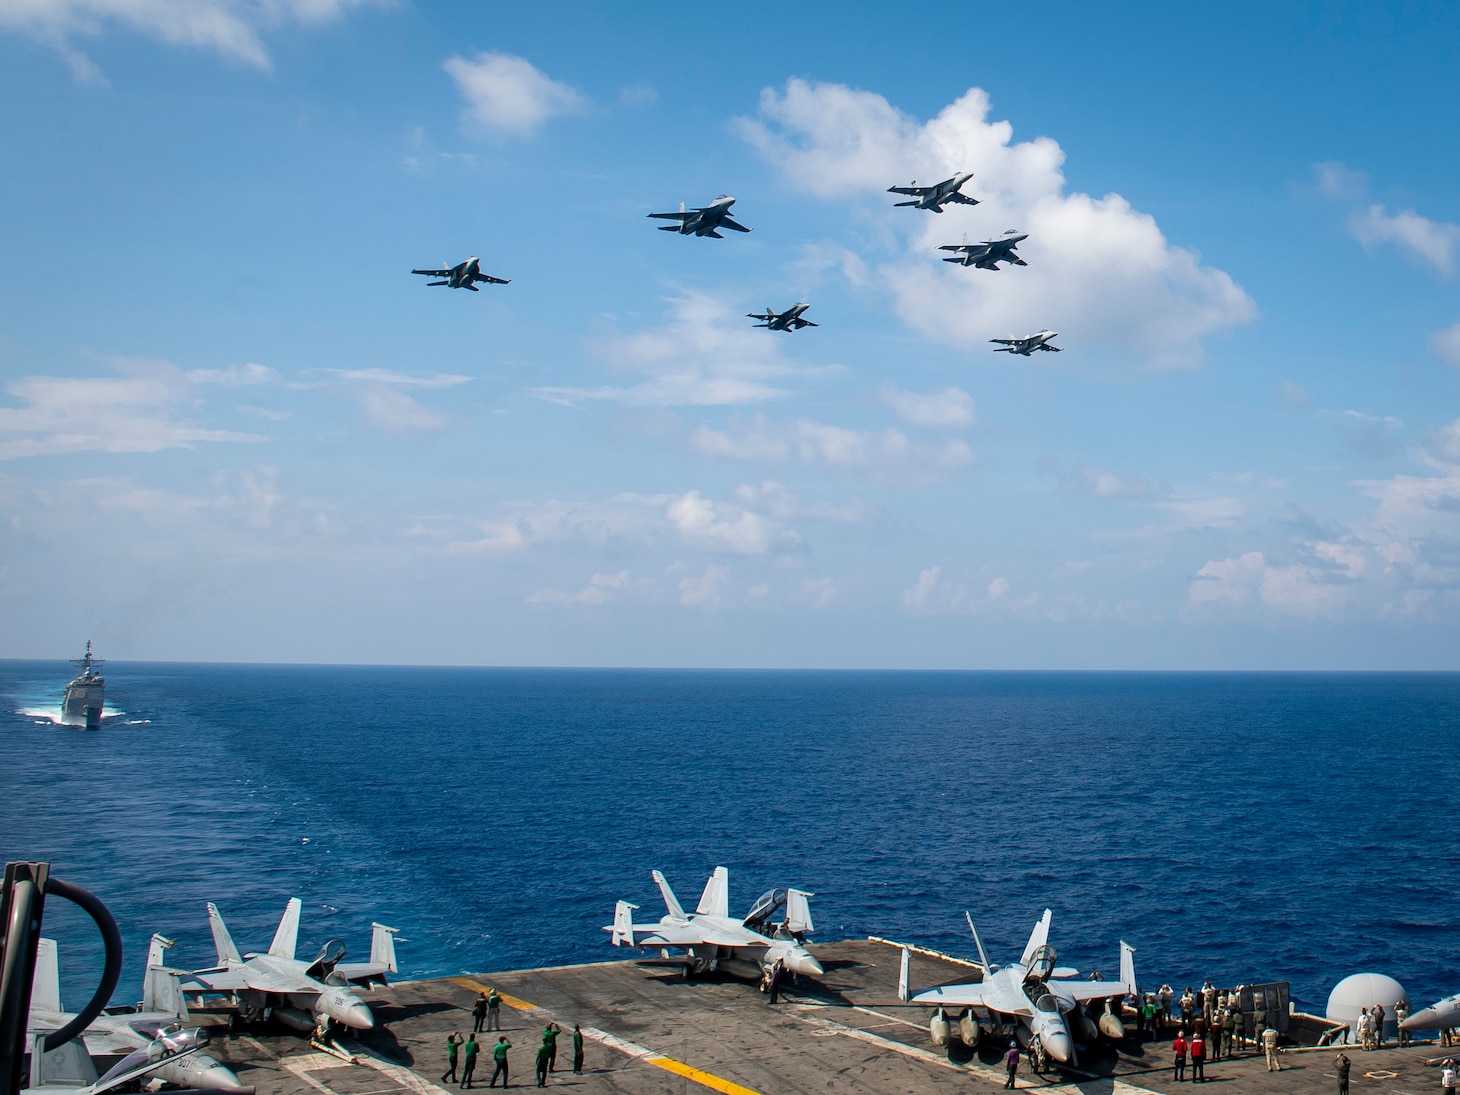 Aircraft from Carrier Air Wing (CVW) 11 and the Royal Malaysian Air Force (RMAF) fly above the aircraft carrier USS Theodore Roosevelt (CVN 71).